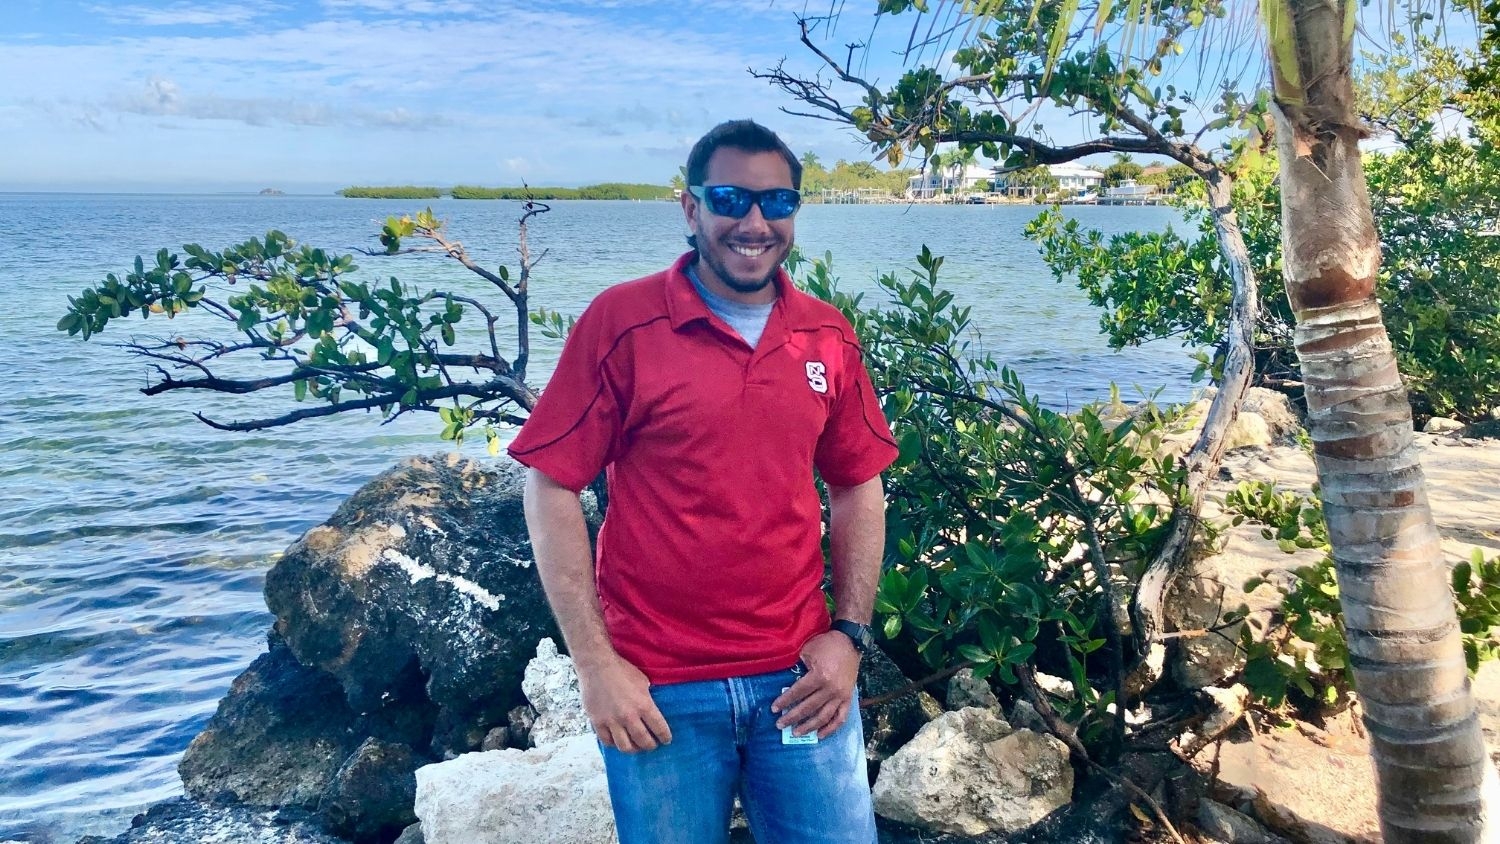 Daniel Parobok in NC State shirt in front of ocean and tropical tree